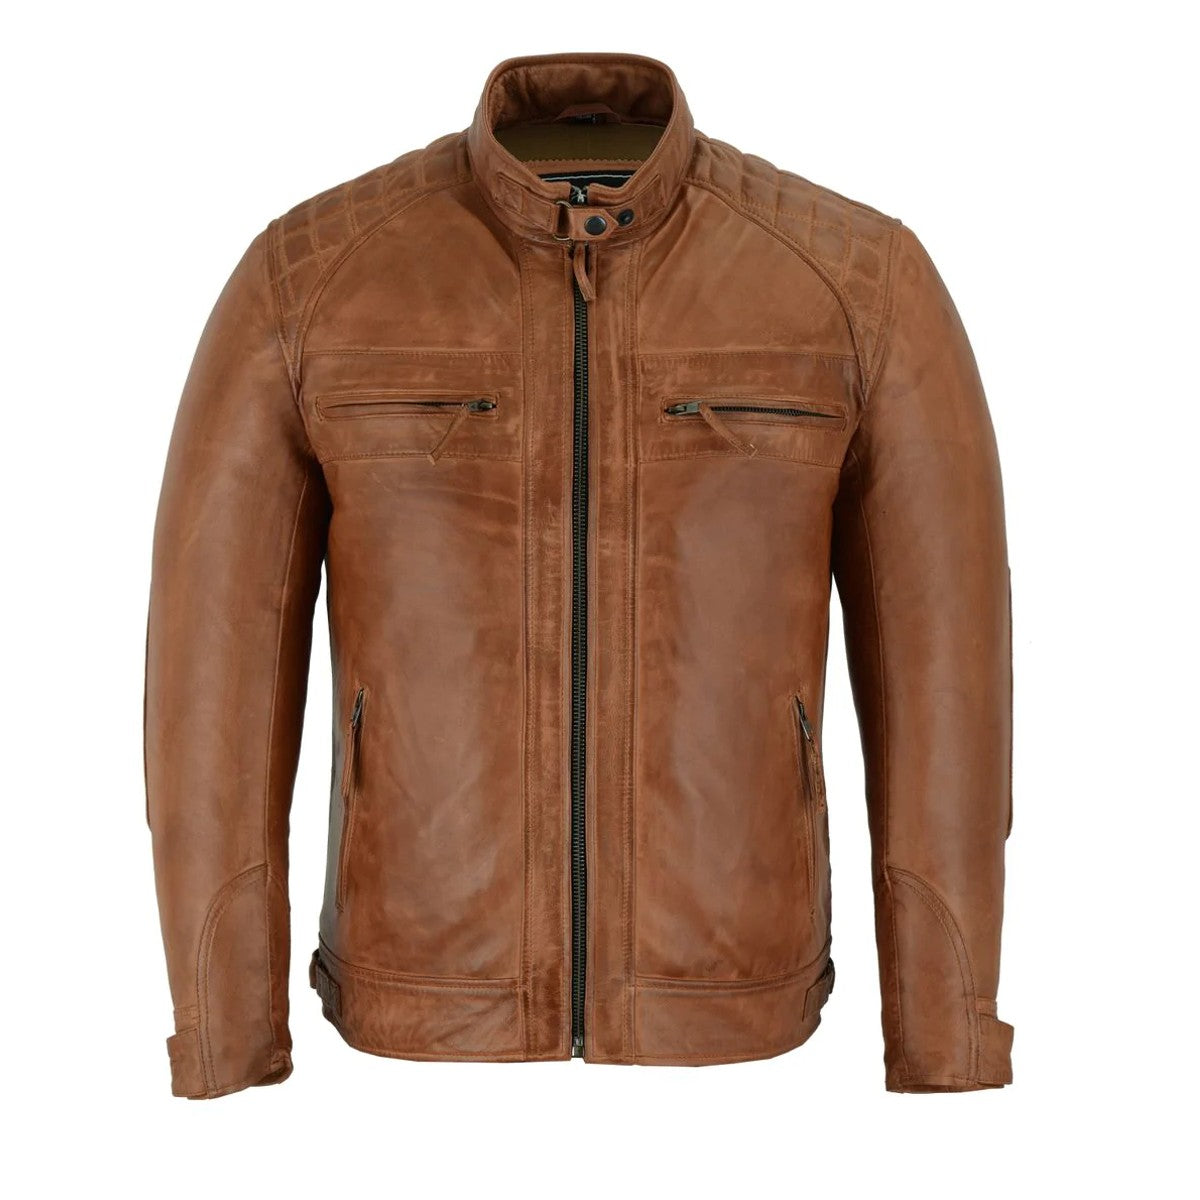 The Vance Cafe Racer Austin Brown Leather Jacket.